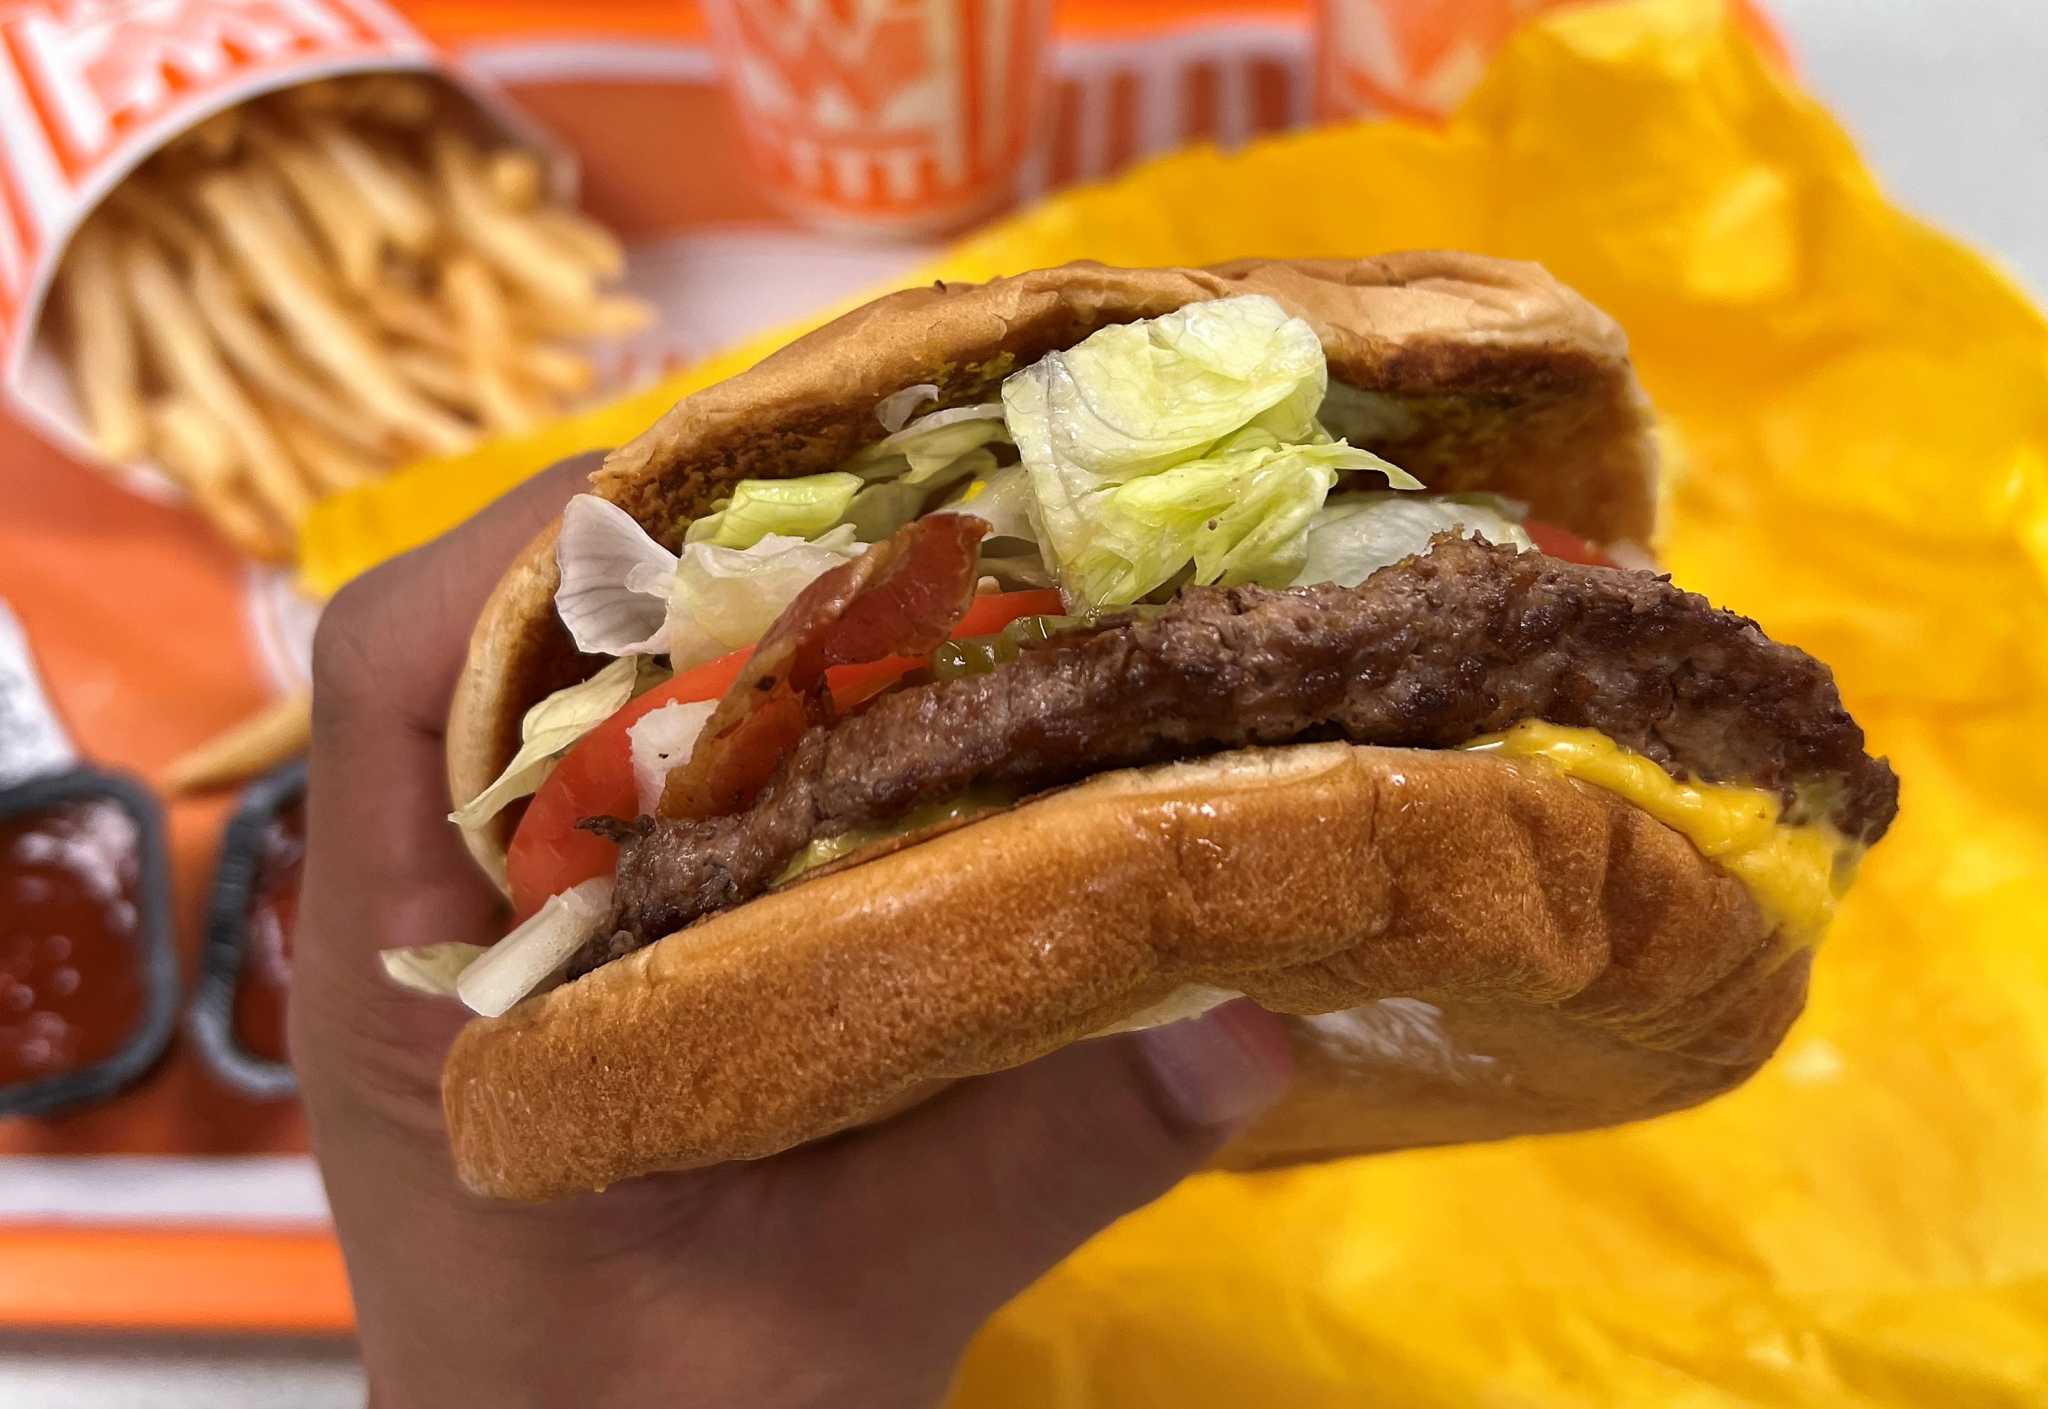 Best Whataburgers in Houston and worst locations, based on reviews